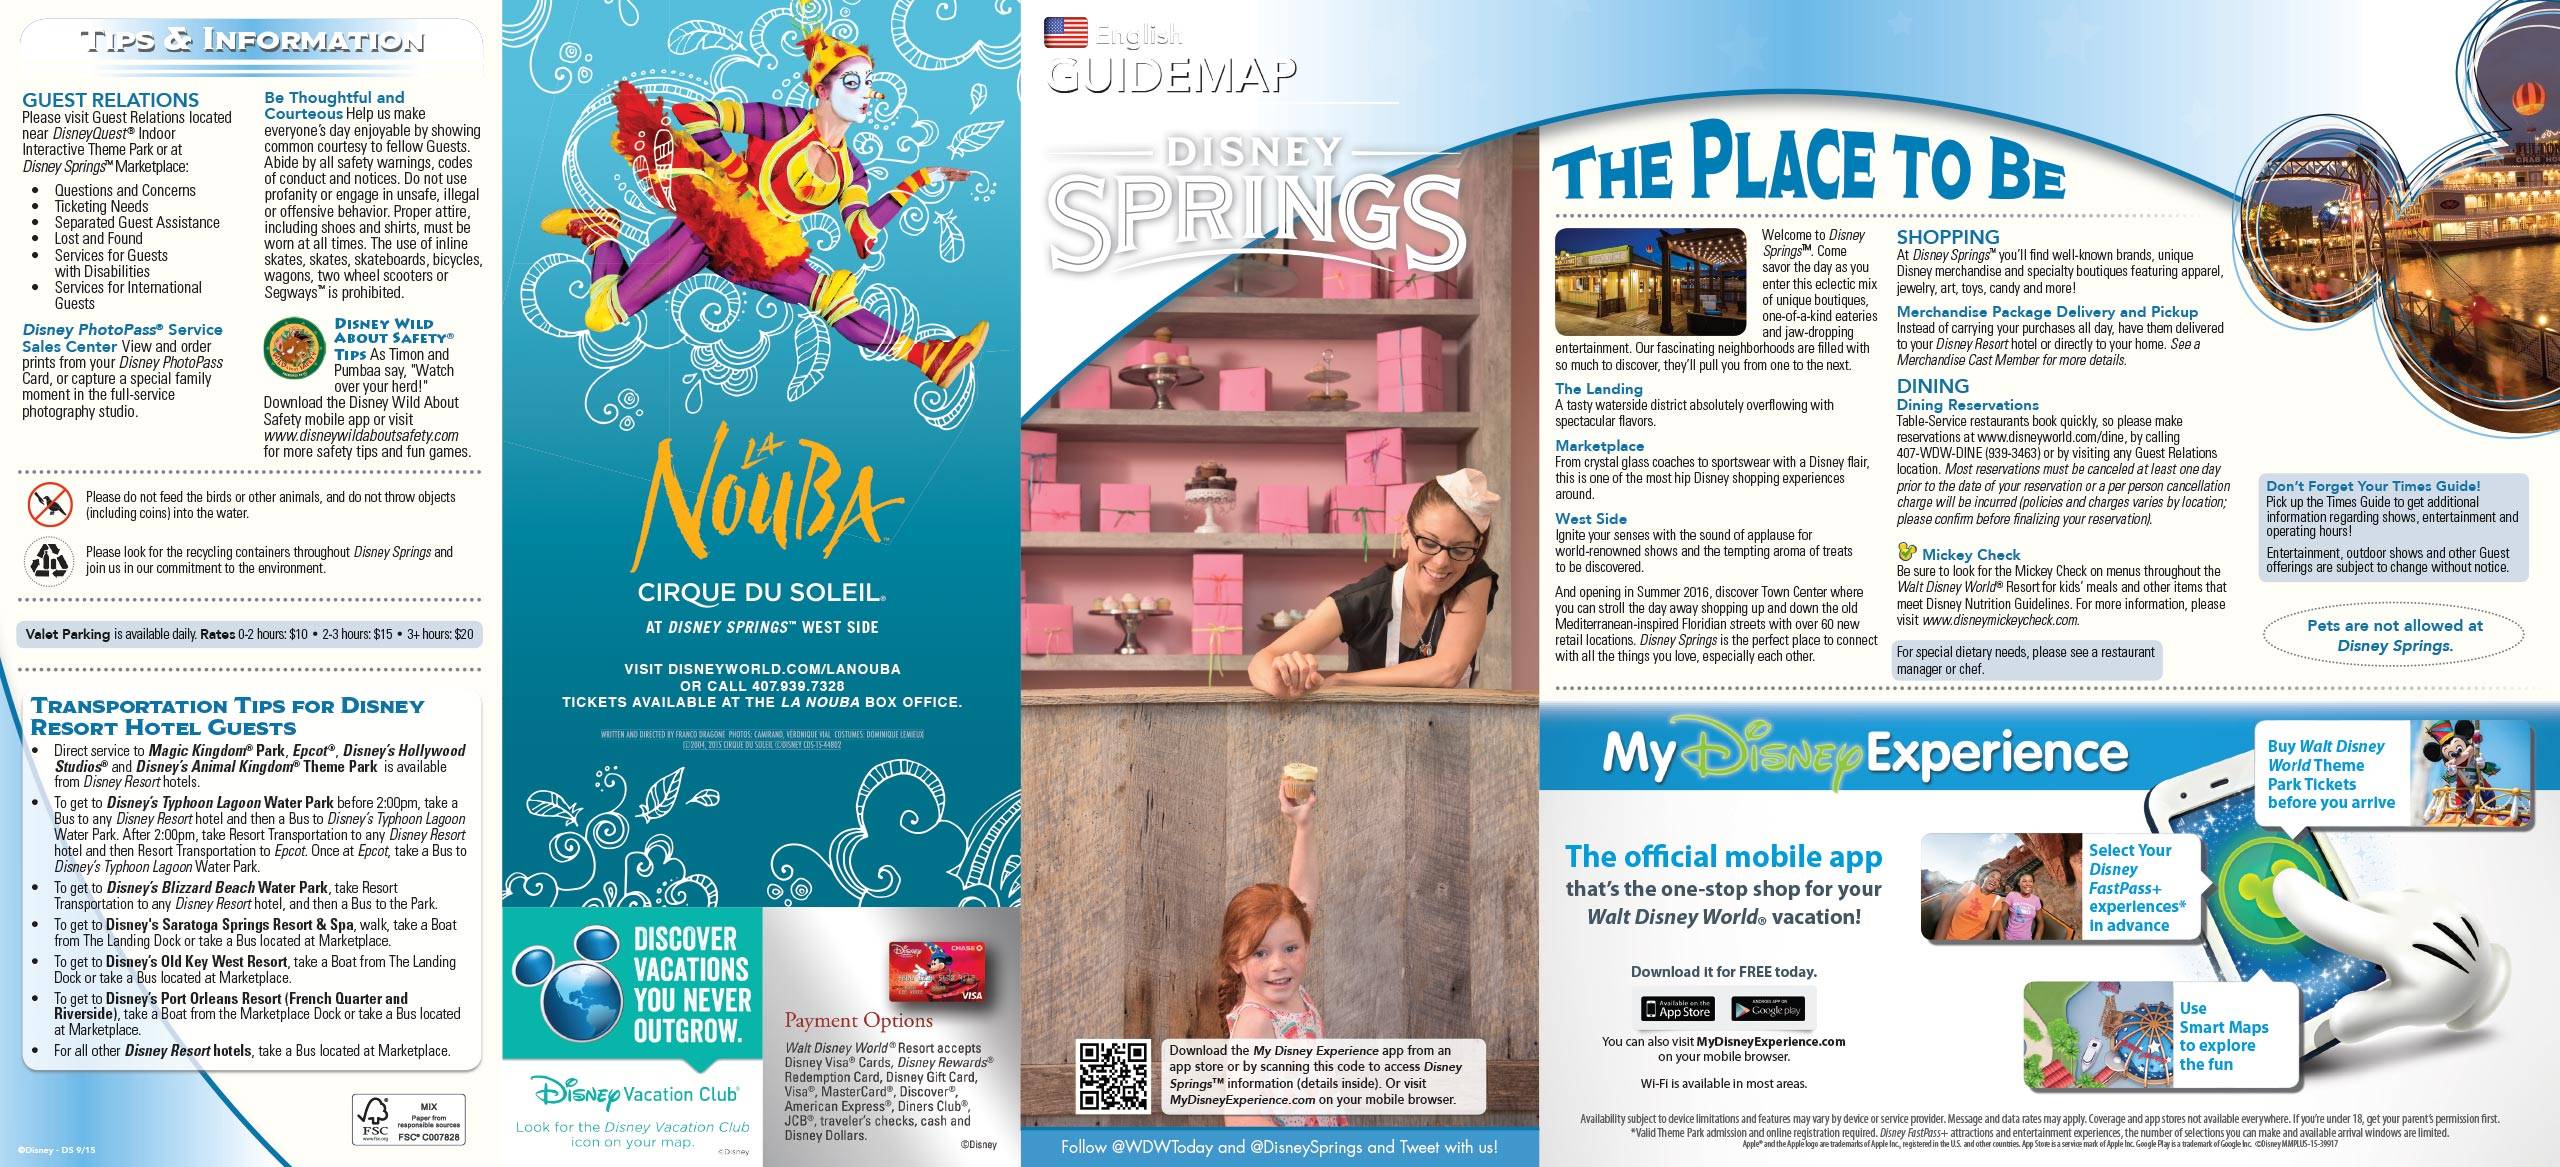 PHOTOS - Downtown Disney officially transitions to Disney Springs today - see the new guide map